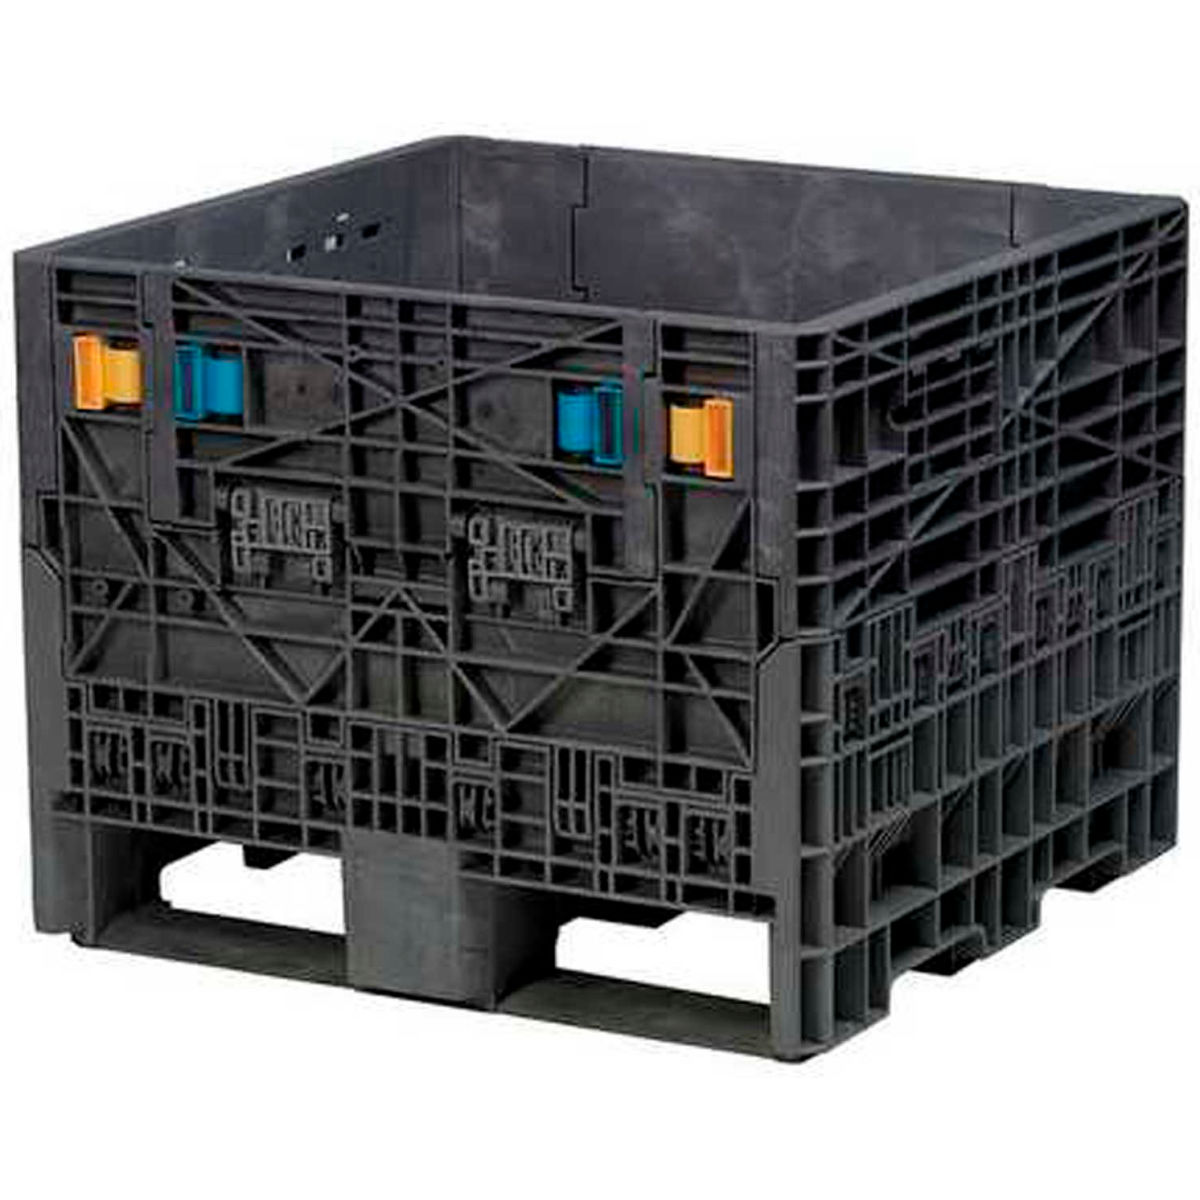 Picture of Akro-Mils 4858000 1800 lbs Buckhorn BN3230252010000 Folding Bulk Container - Black - 32 x 30 x 25 in.